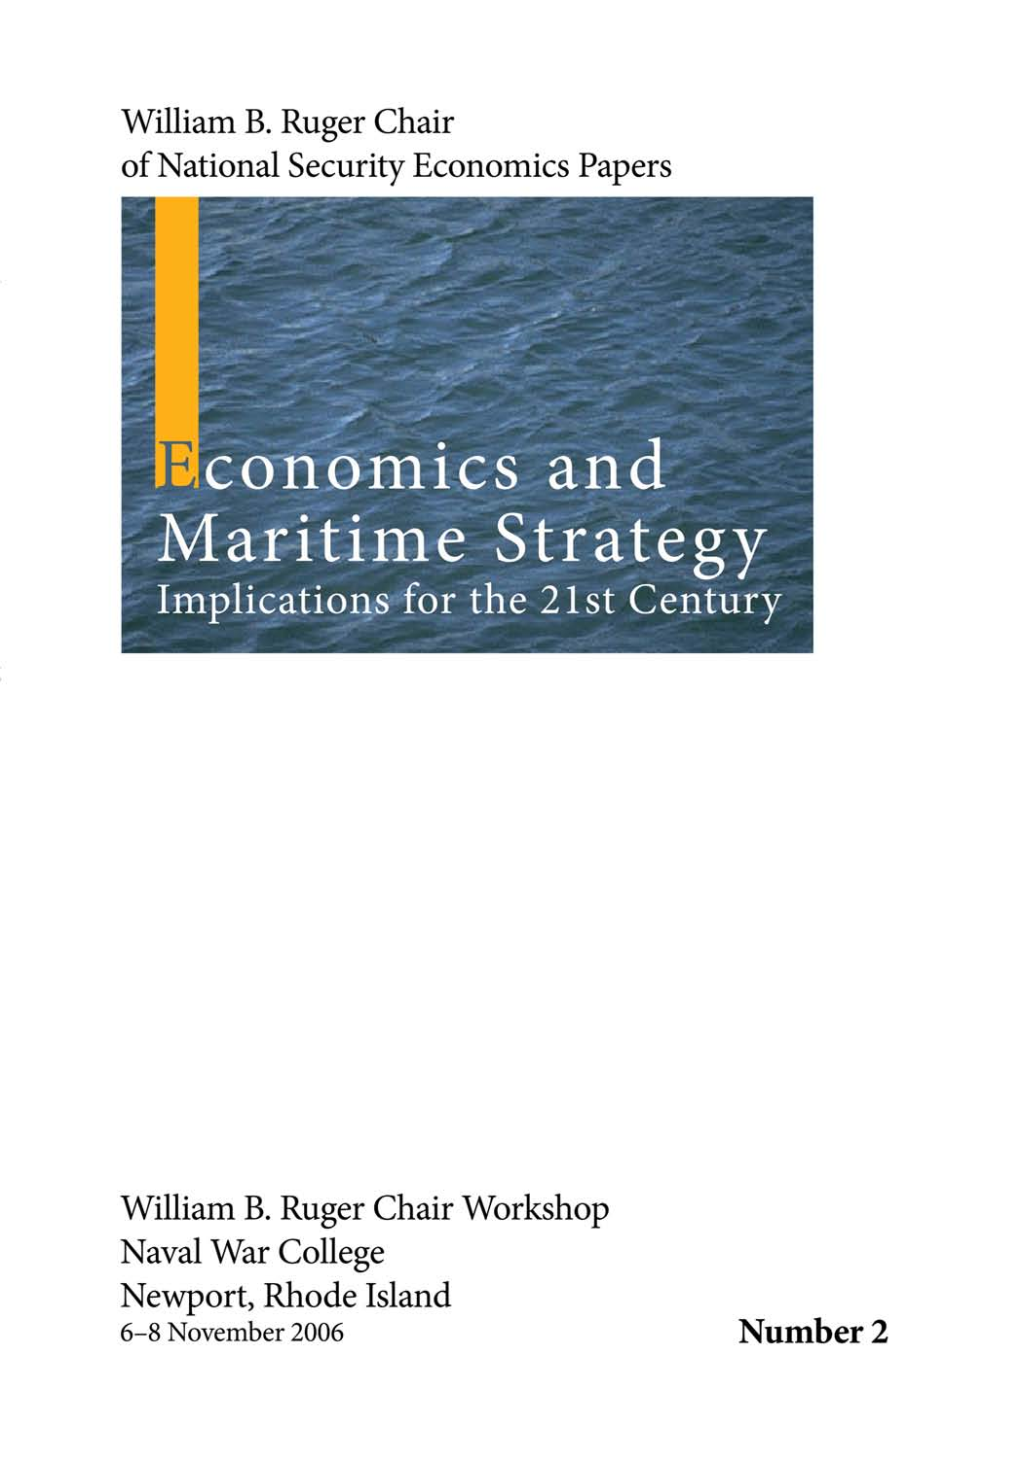 Economics and Maritime Strategy: Implications for the 21St Century